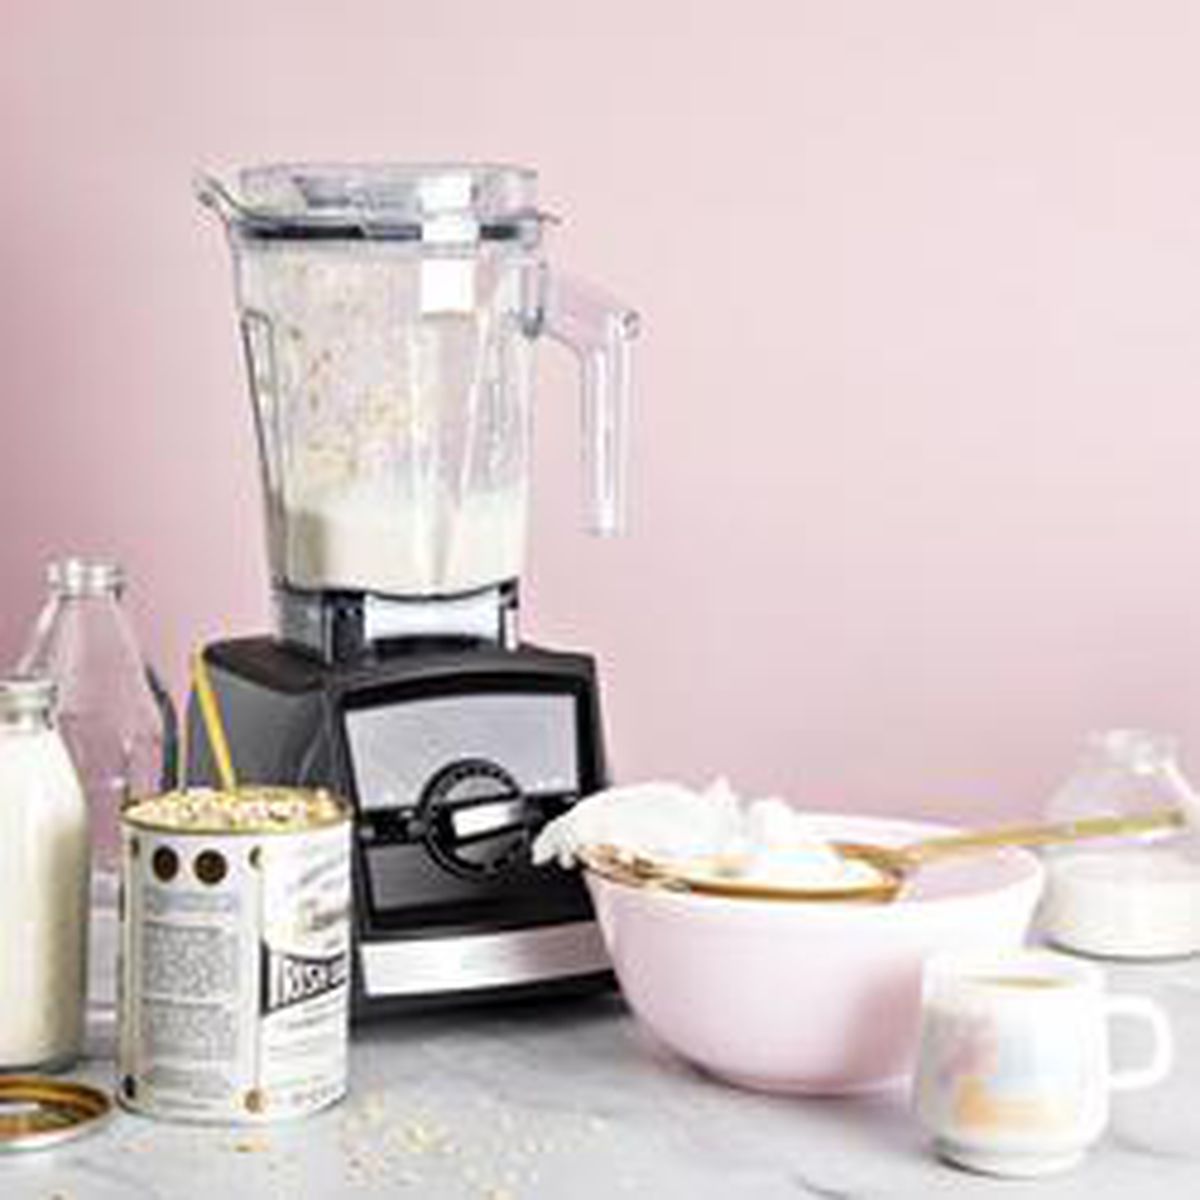 A vitamix blender surrounded by baking supplies